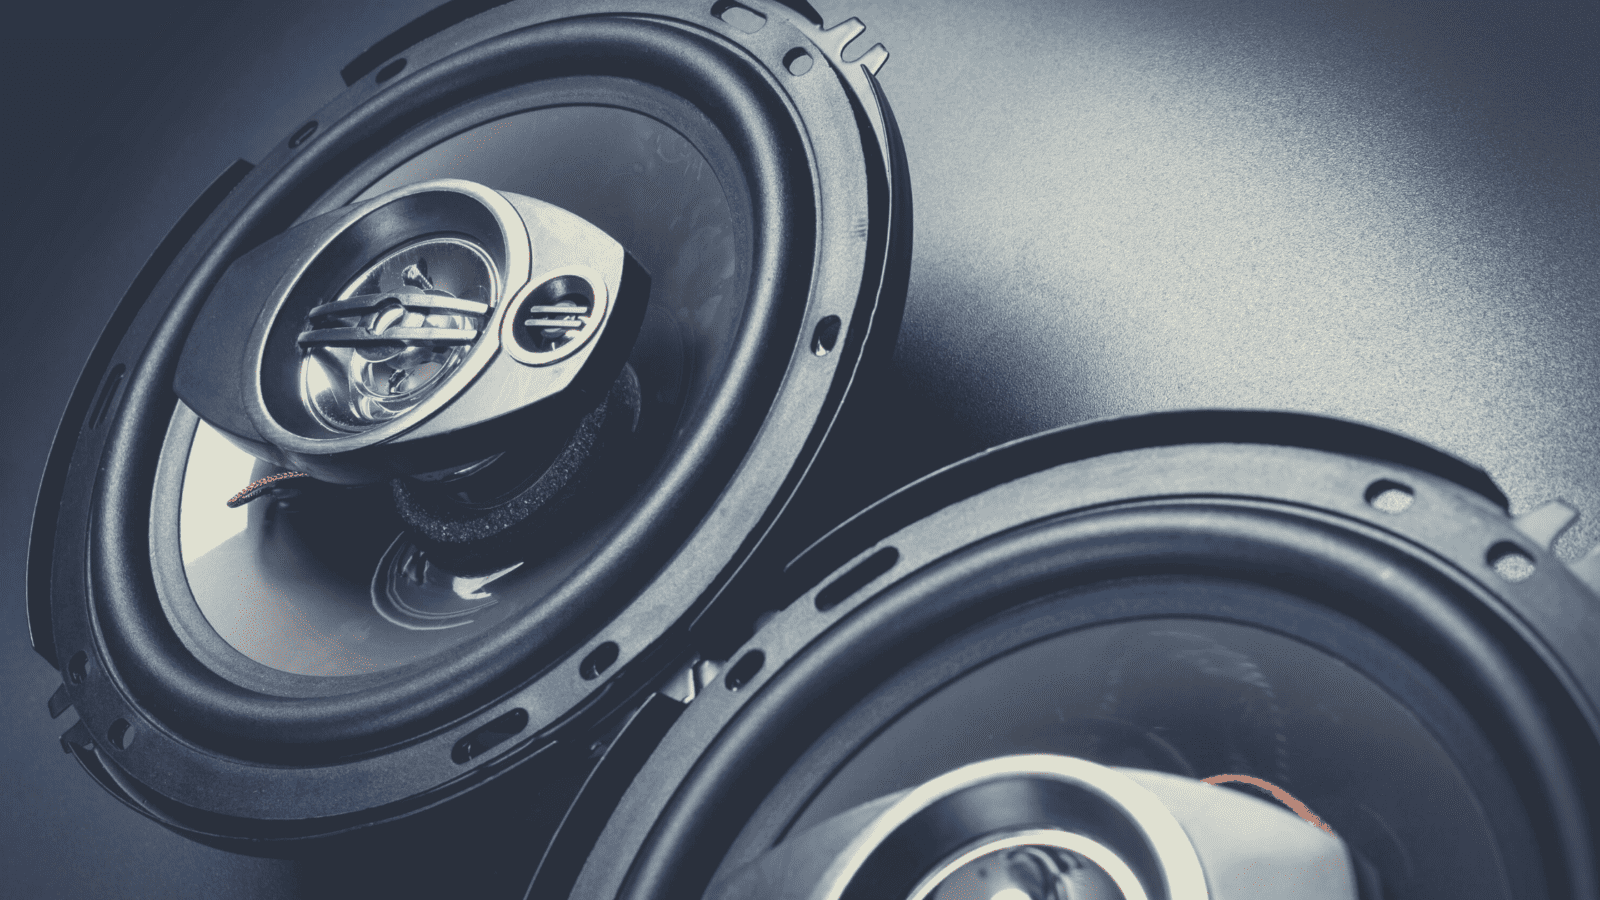 The Best 6X9 Speakers With Amplifier for your car